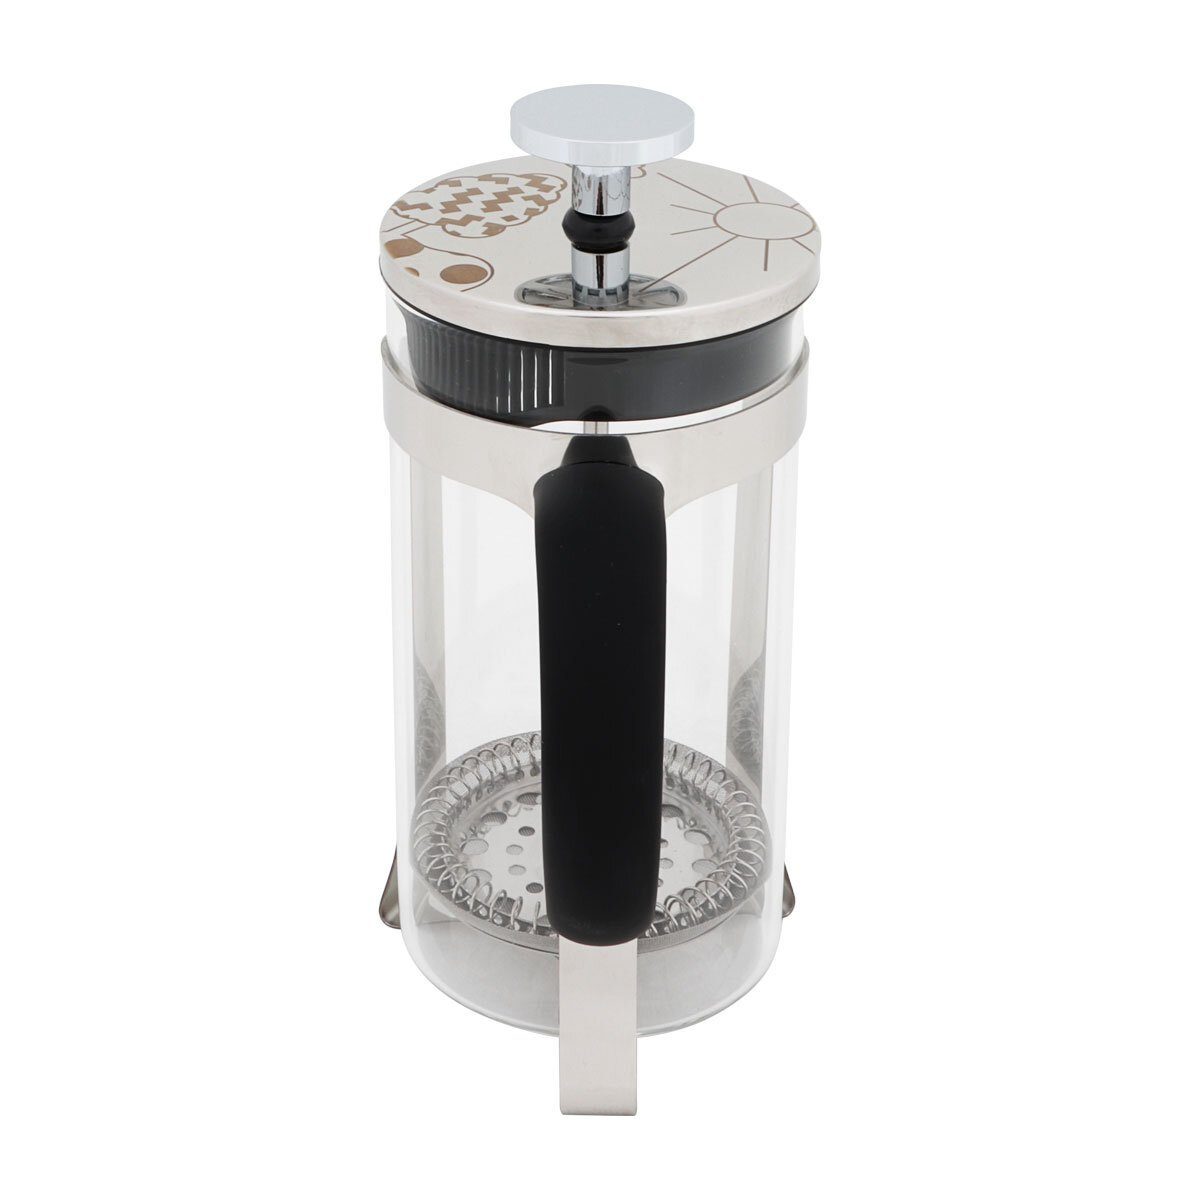 ANY MORNING French Press Morning Kanne Ml, French Kaffeebereiter, Any FY450 Press Silber 600